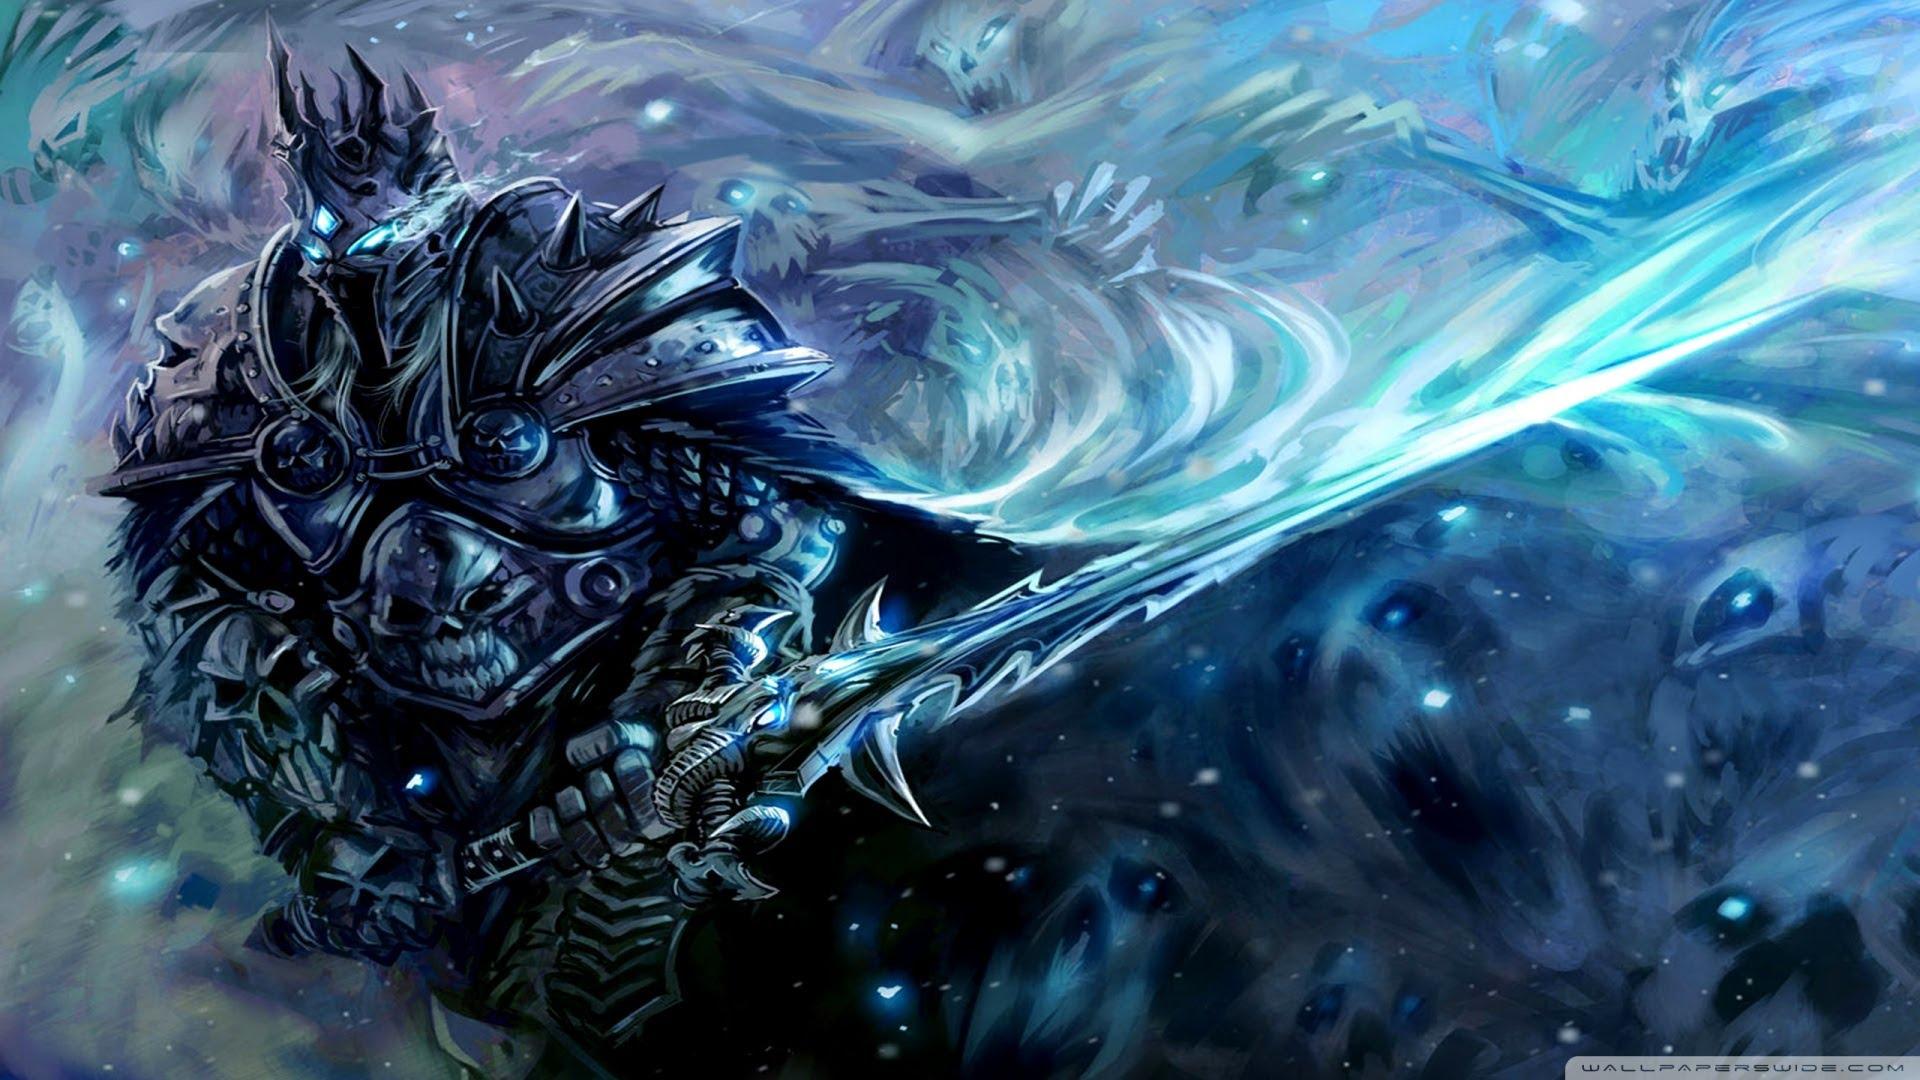 1920x1080 How to: Solo The Lich King 10 man HC YouTube | World of warcraft wallpaper, World of warcraft characters, World of warcraft